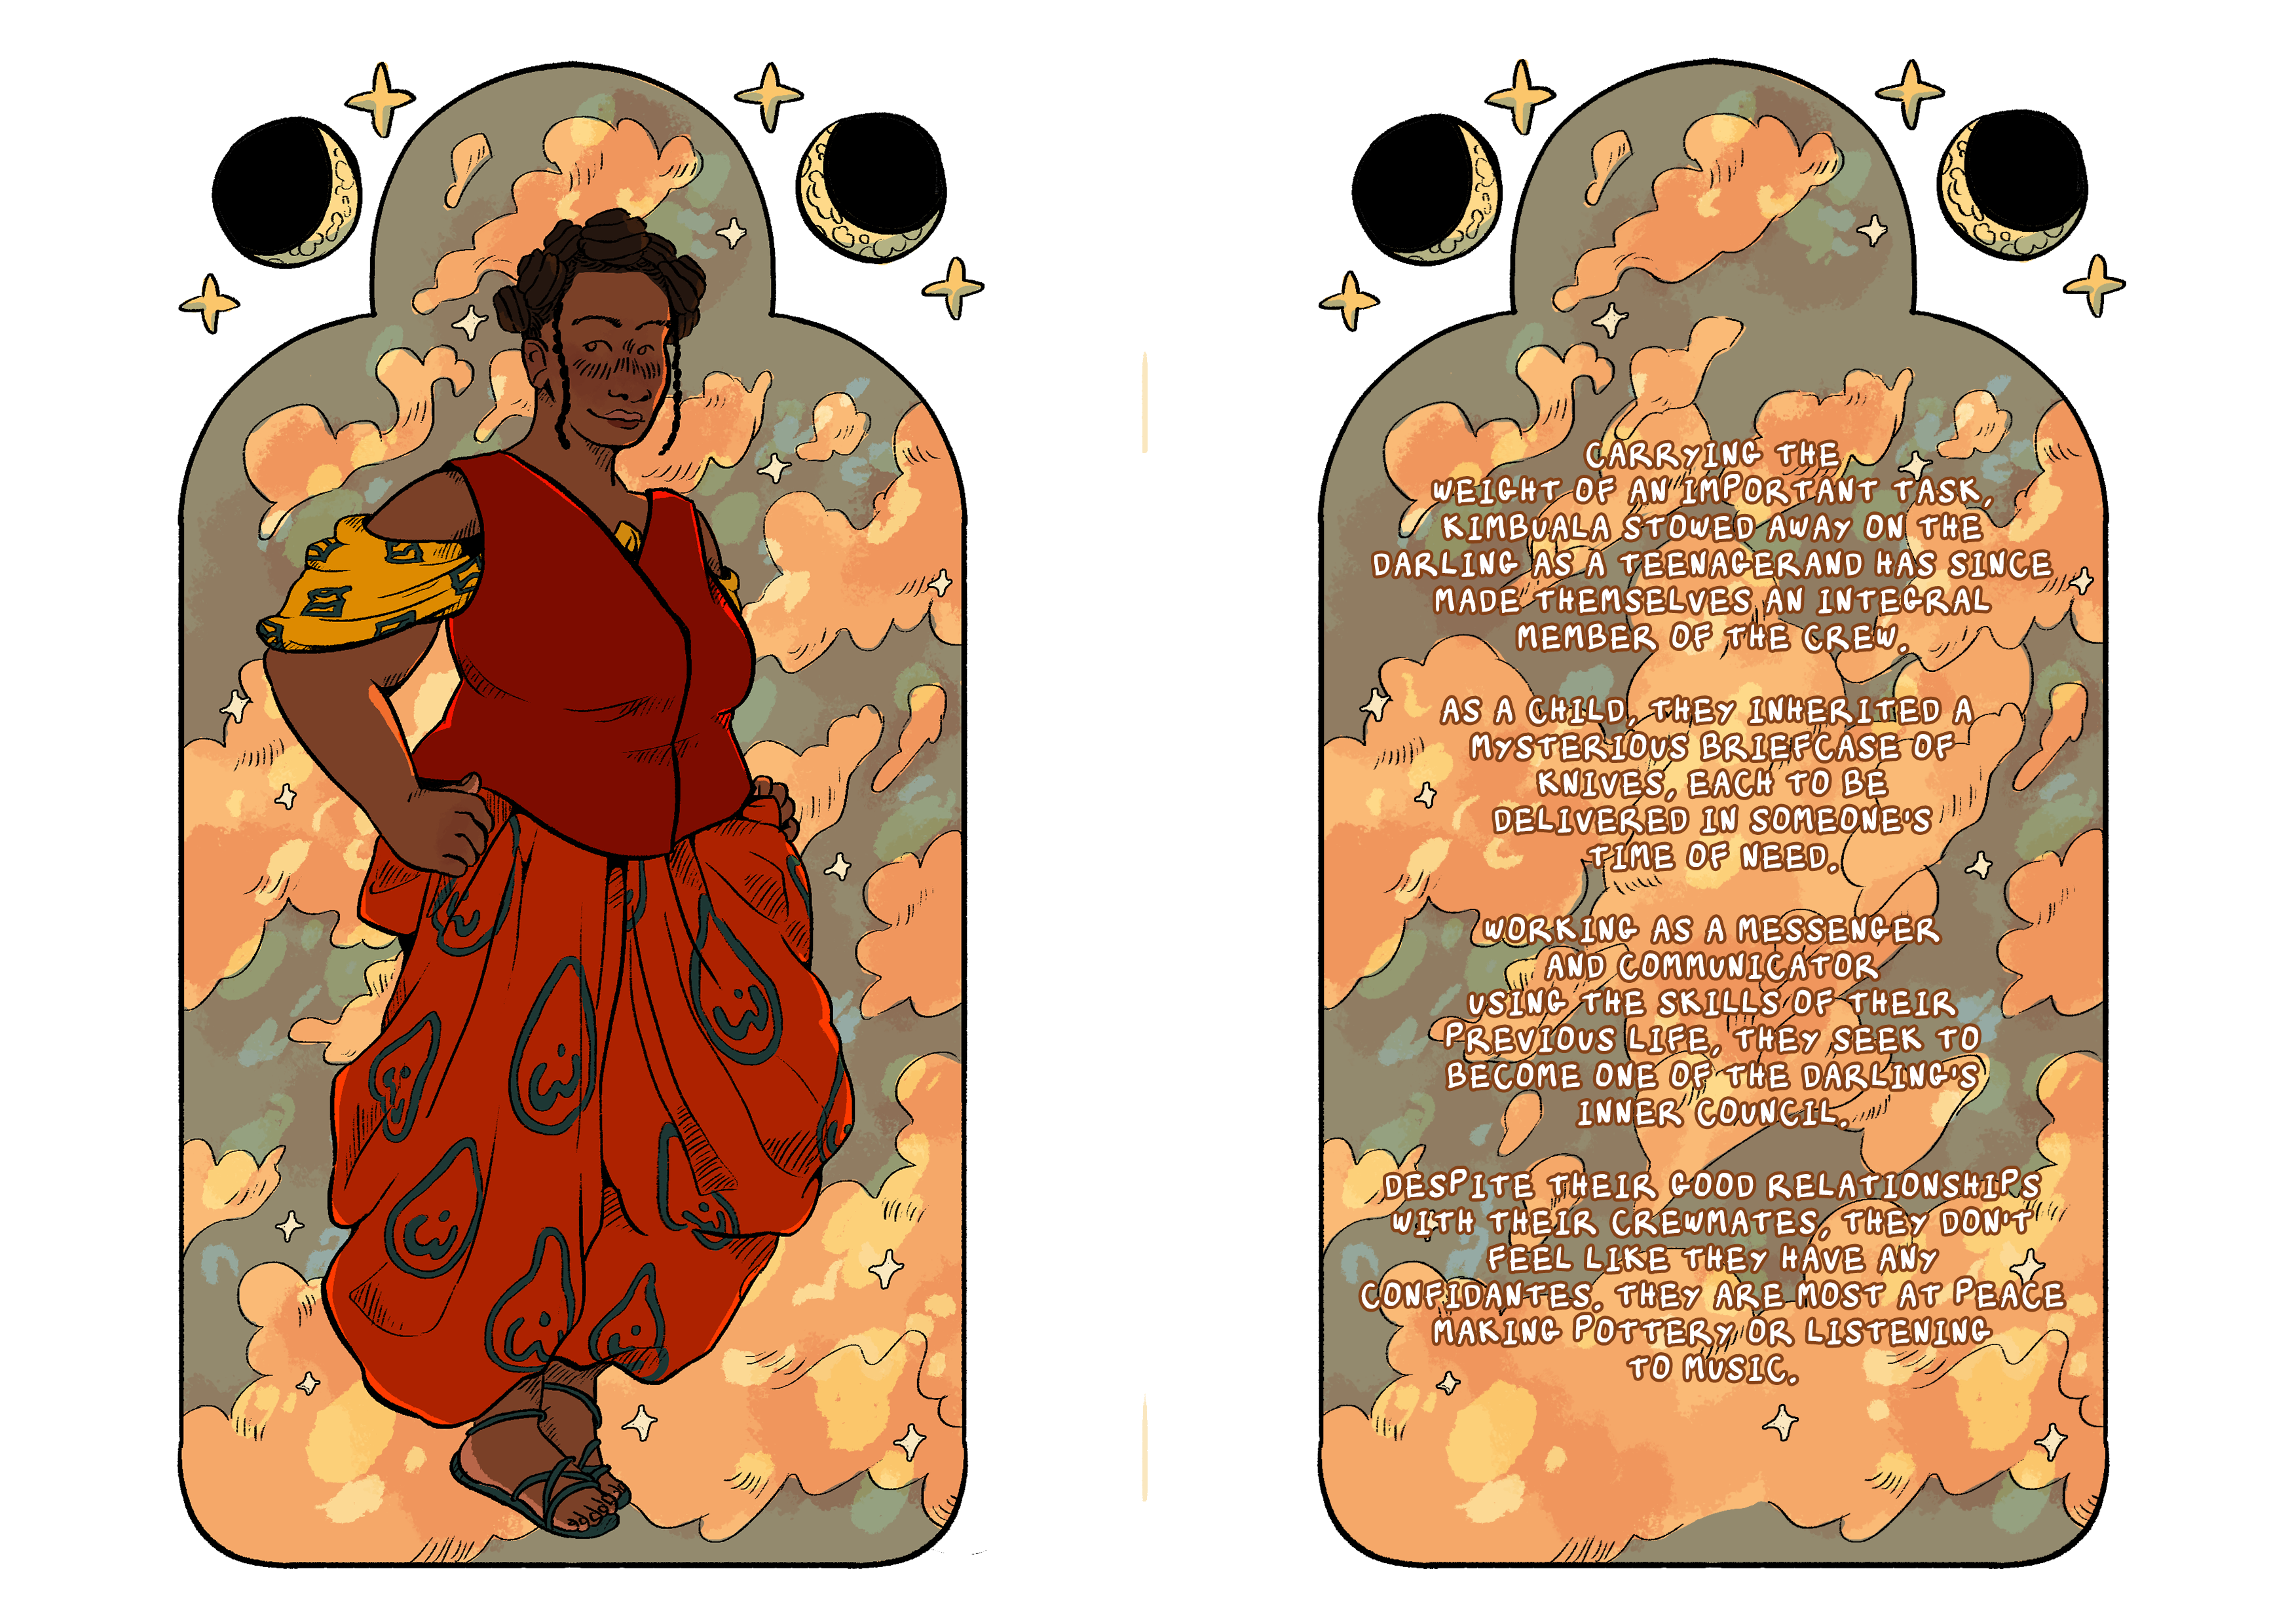 A full-body digital illustration of a young Black person in warm-coloured baggy clothes with African-inspired wax patterns on and a red waistcoat. Behind them is a frame with three arches full of orange clouds against a blue-grey background, with moons and stars outside the frame. In the other half of the image, there's the same frame, full of text explaining their backstory.